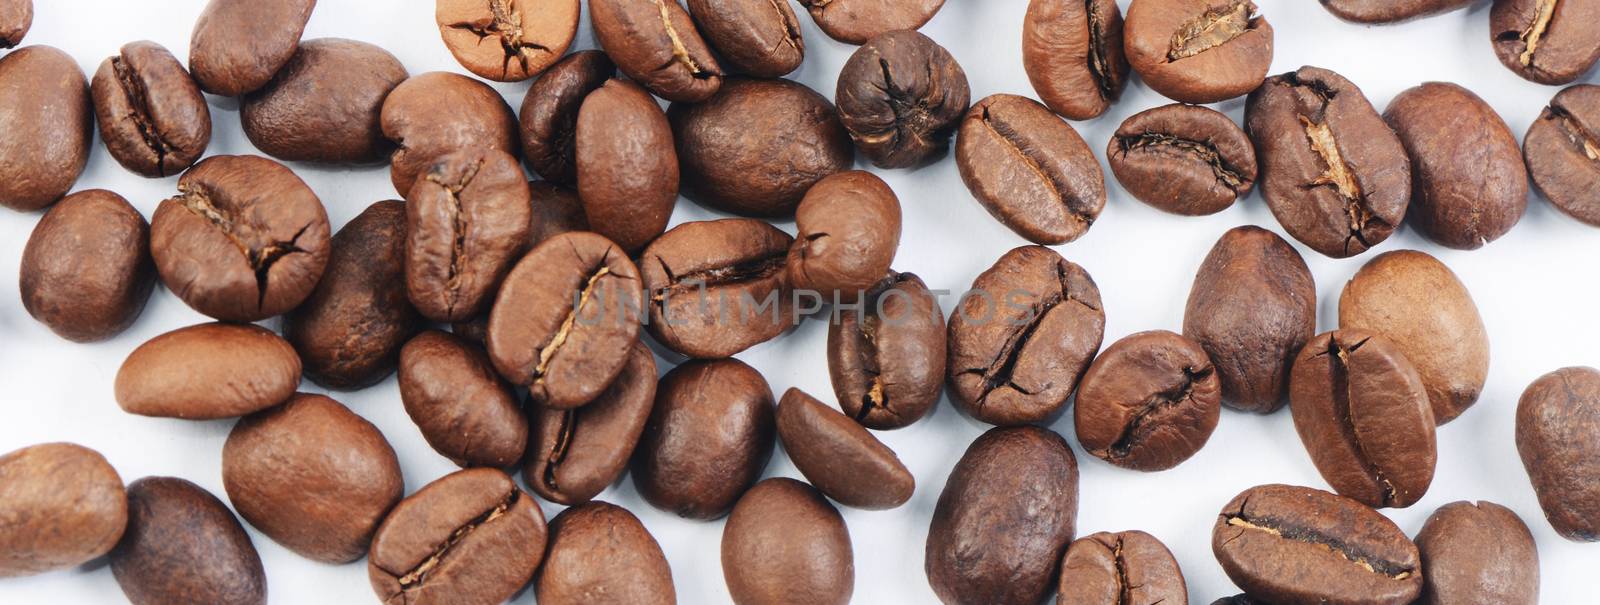 The coffee beans as a background by SvetaVo